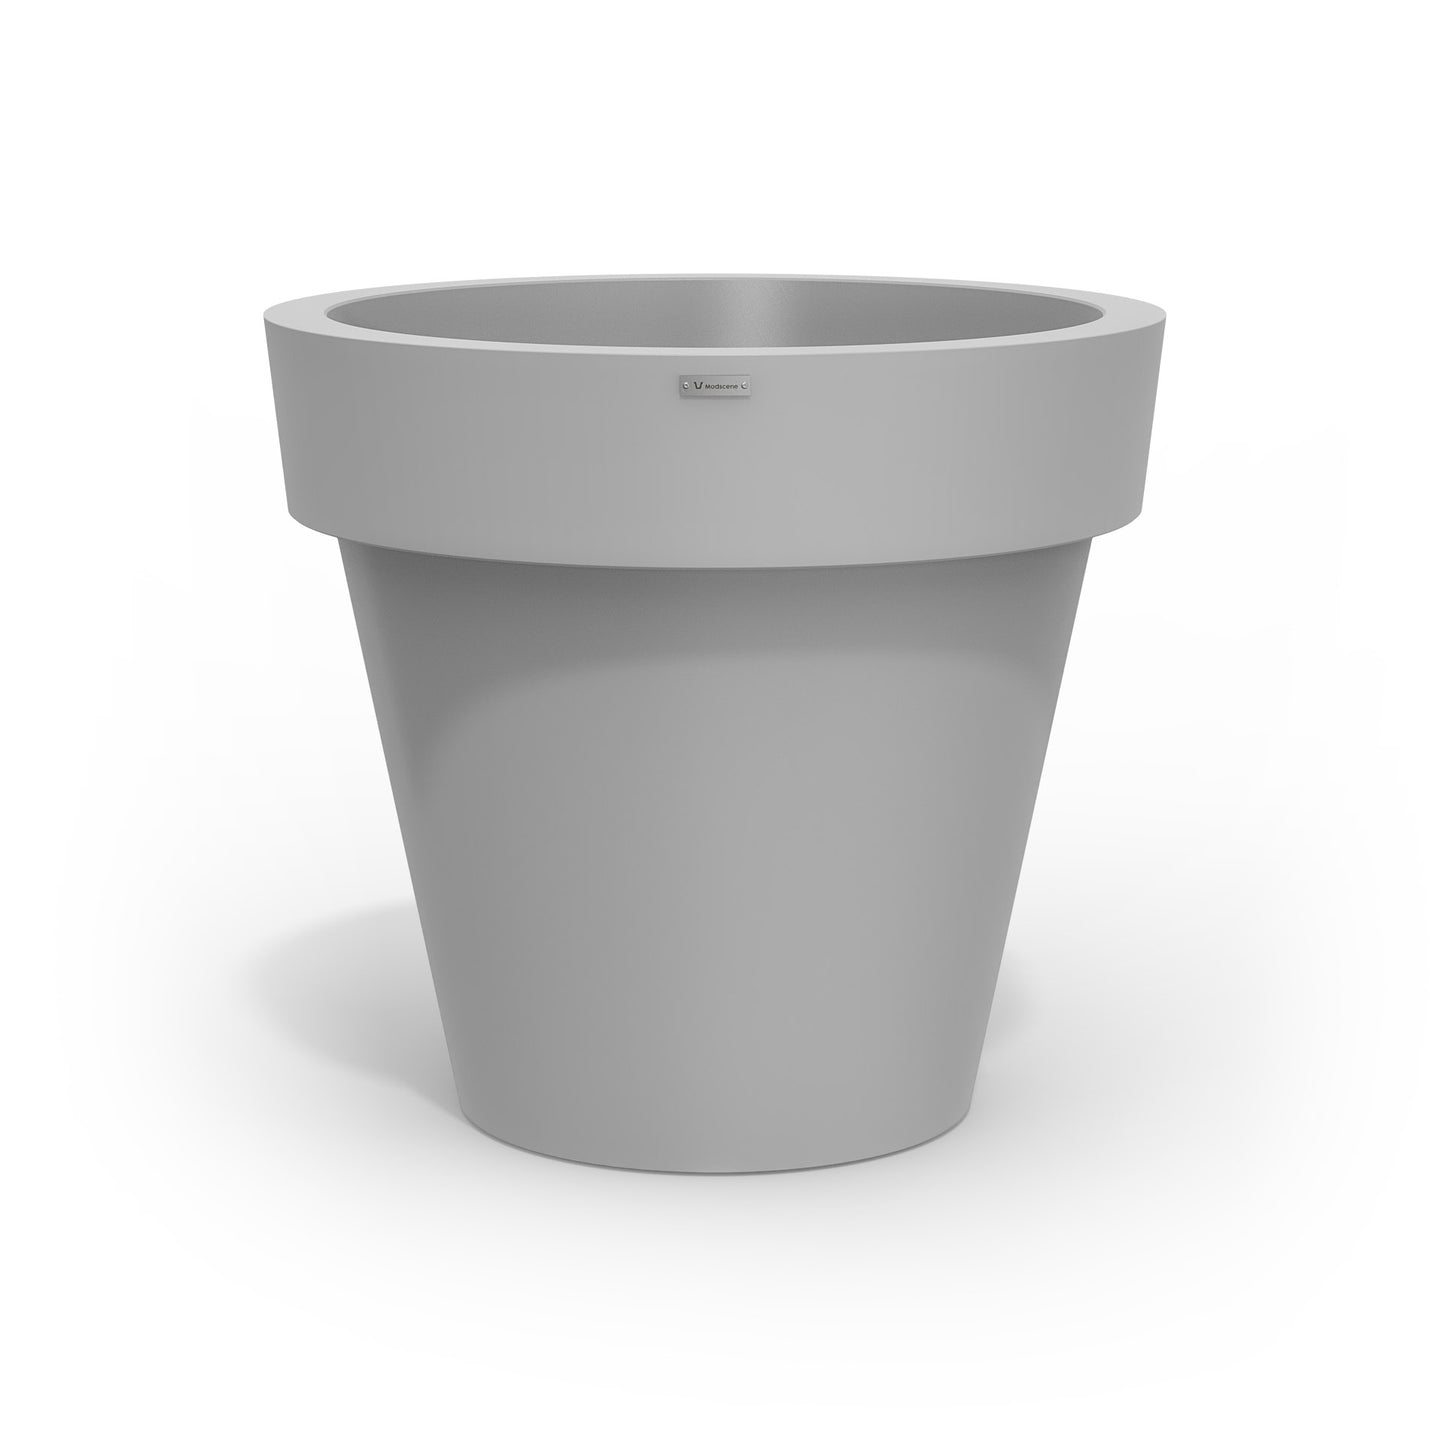 A large planter pot in a light grey colour made by Modscene NZ.